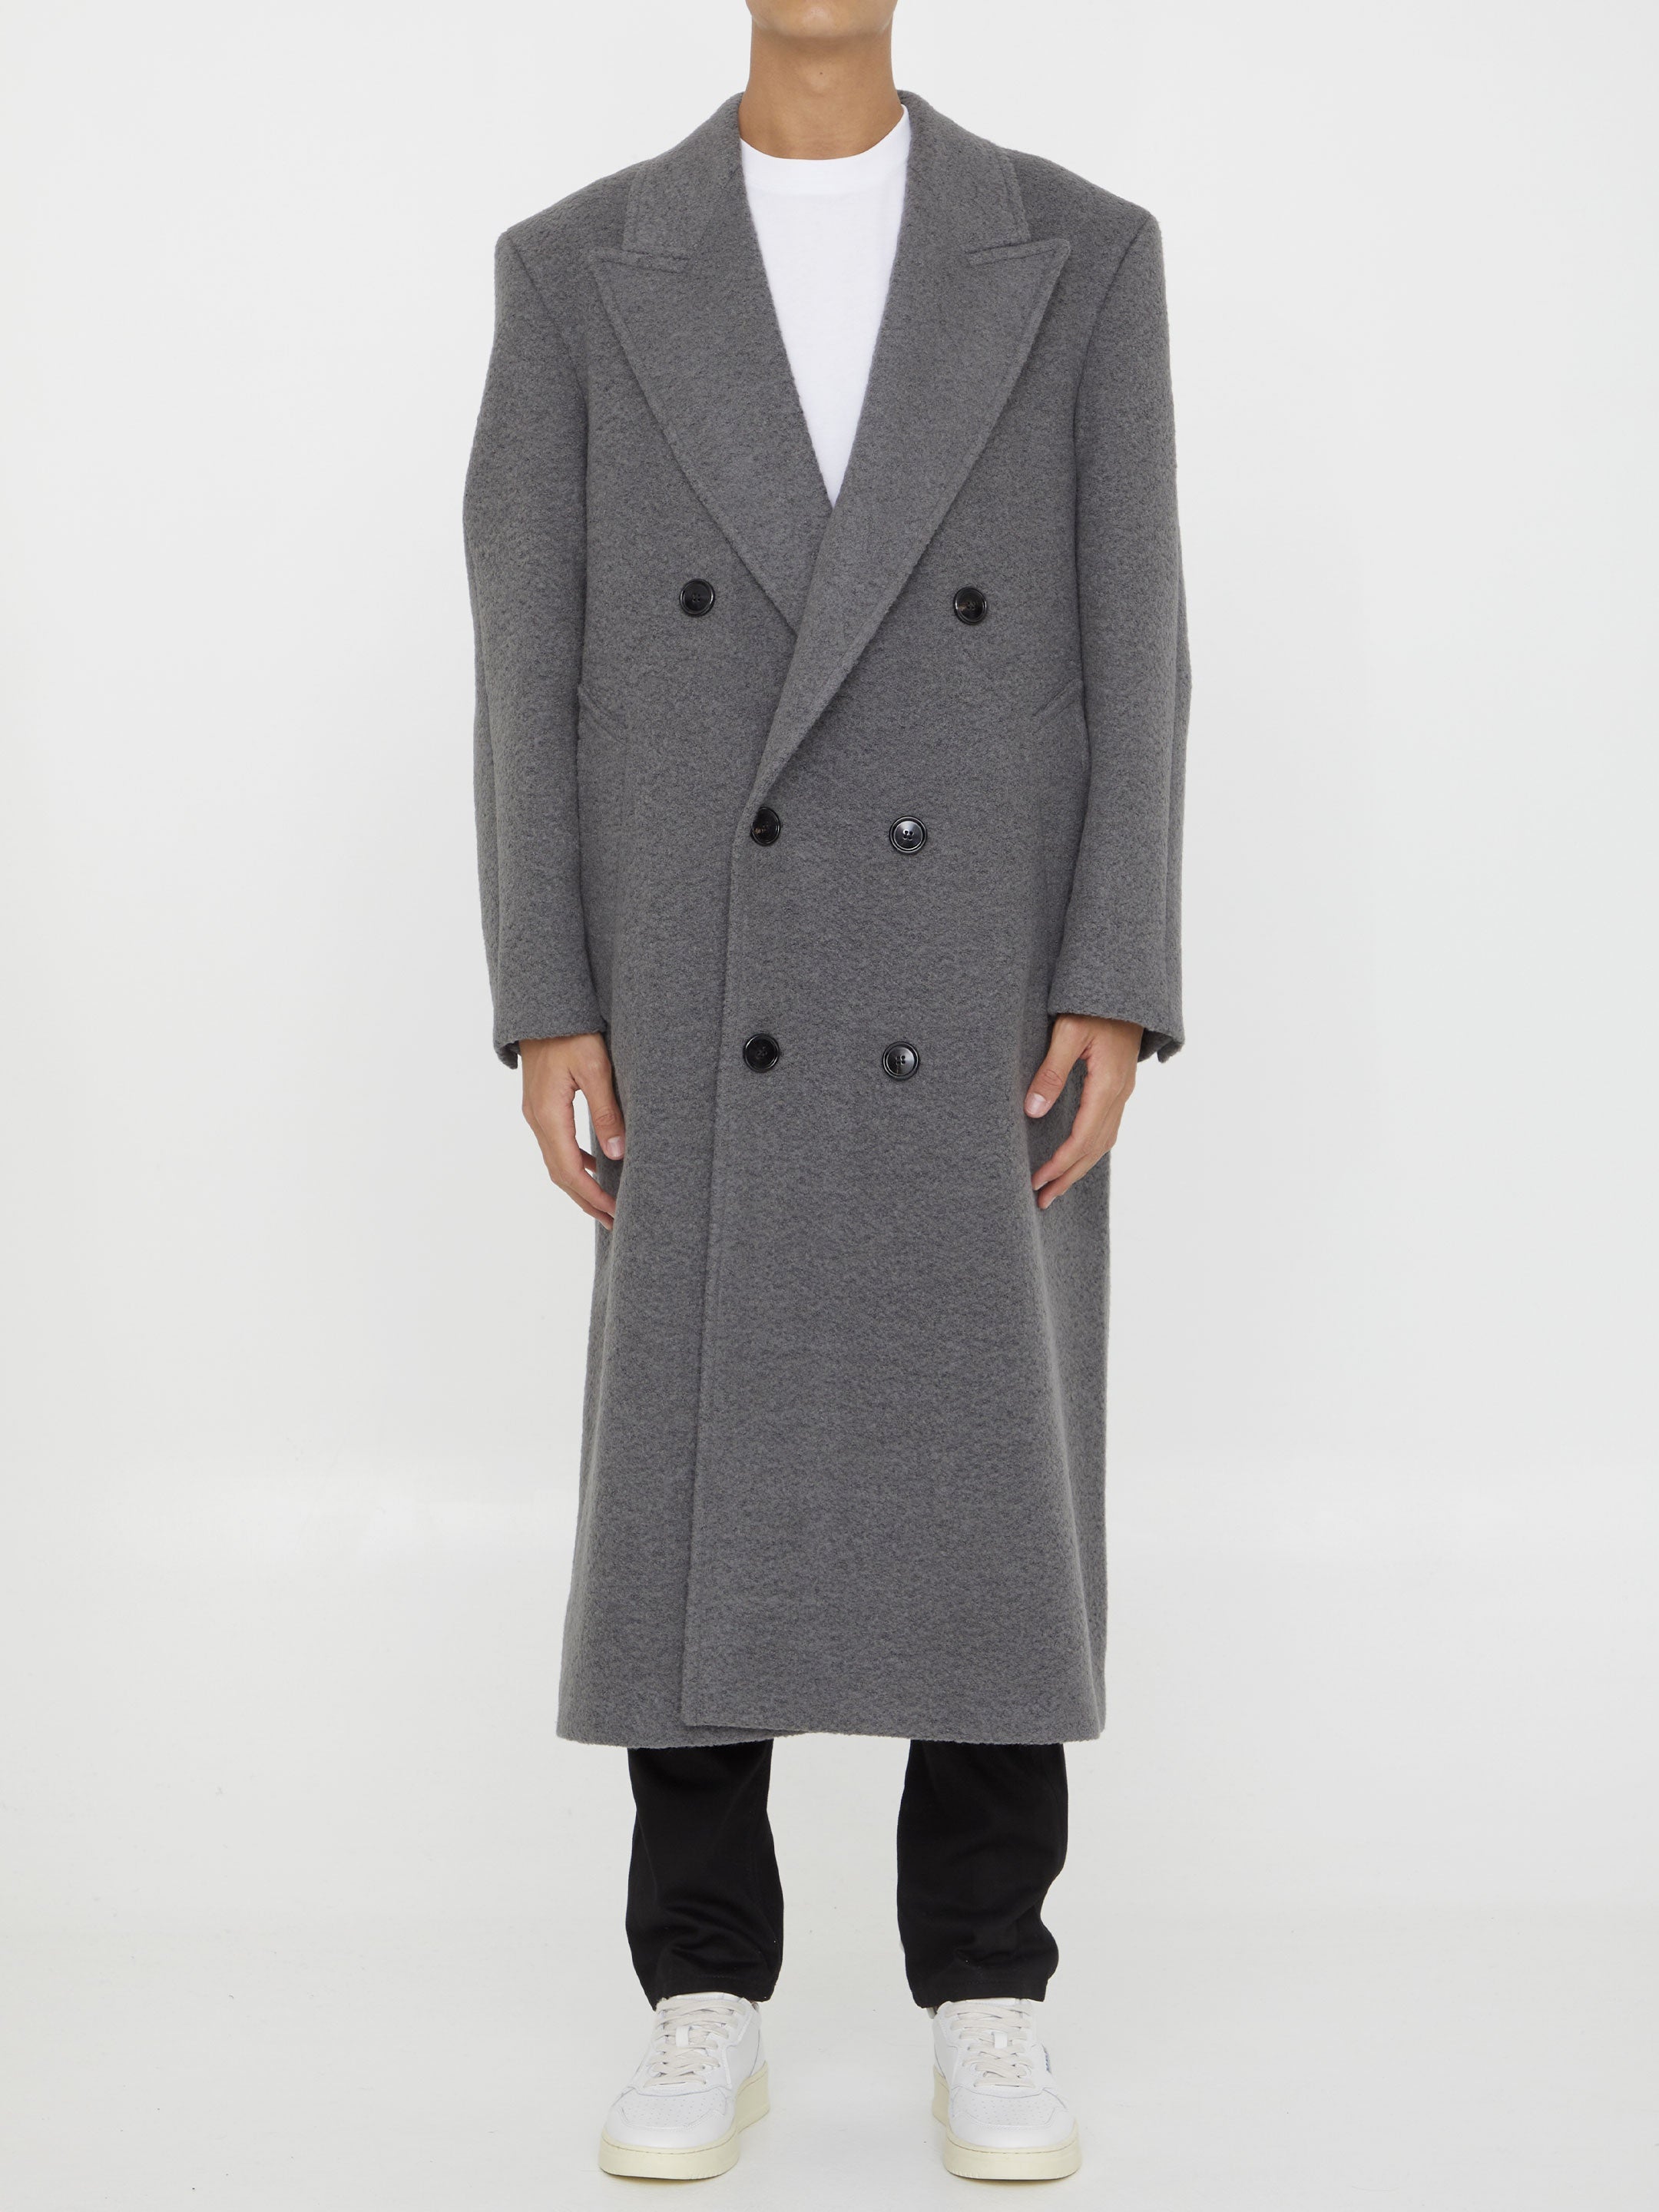 AMI-PARIS-OUTLET-SALE-Double-breasted-coat-Jacken-Mantel-48-GREY-ARCHIVE-COLLECTION.jpg